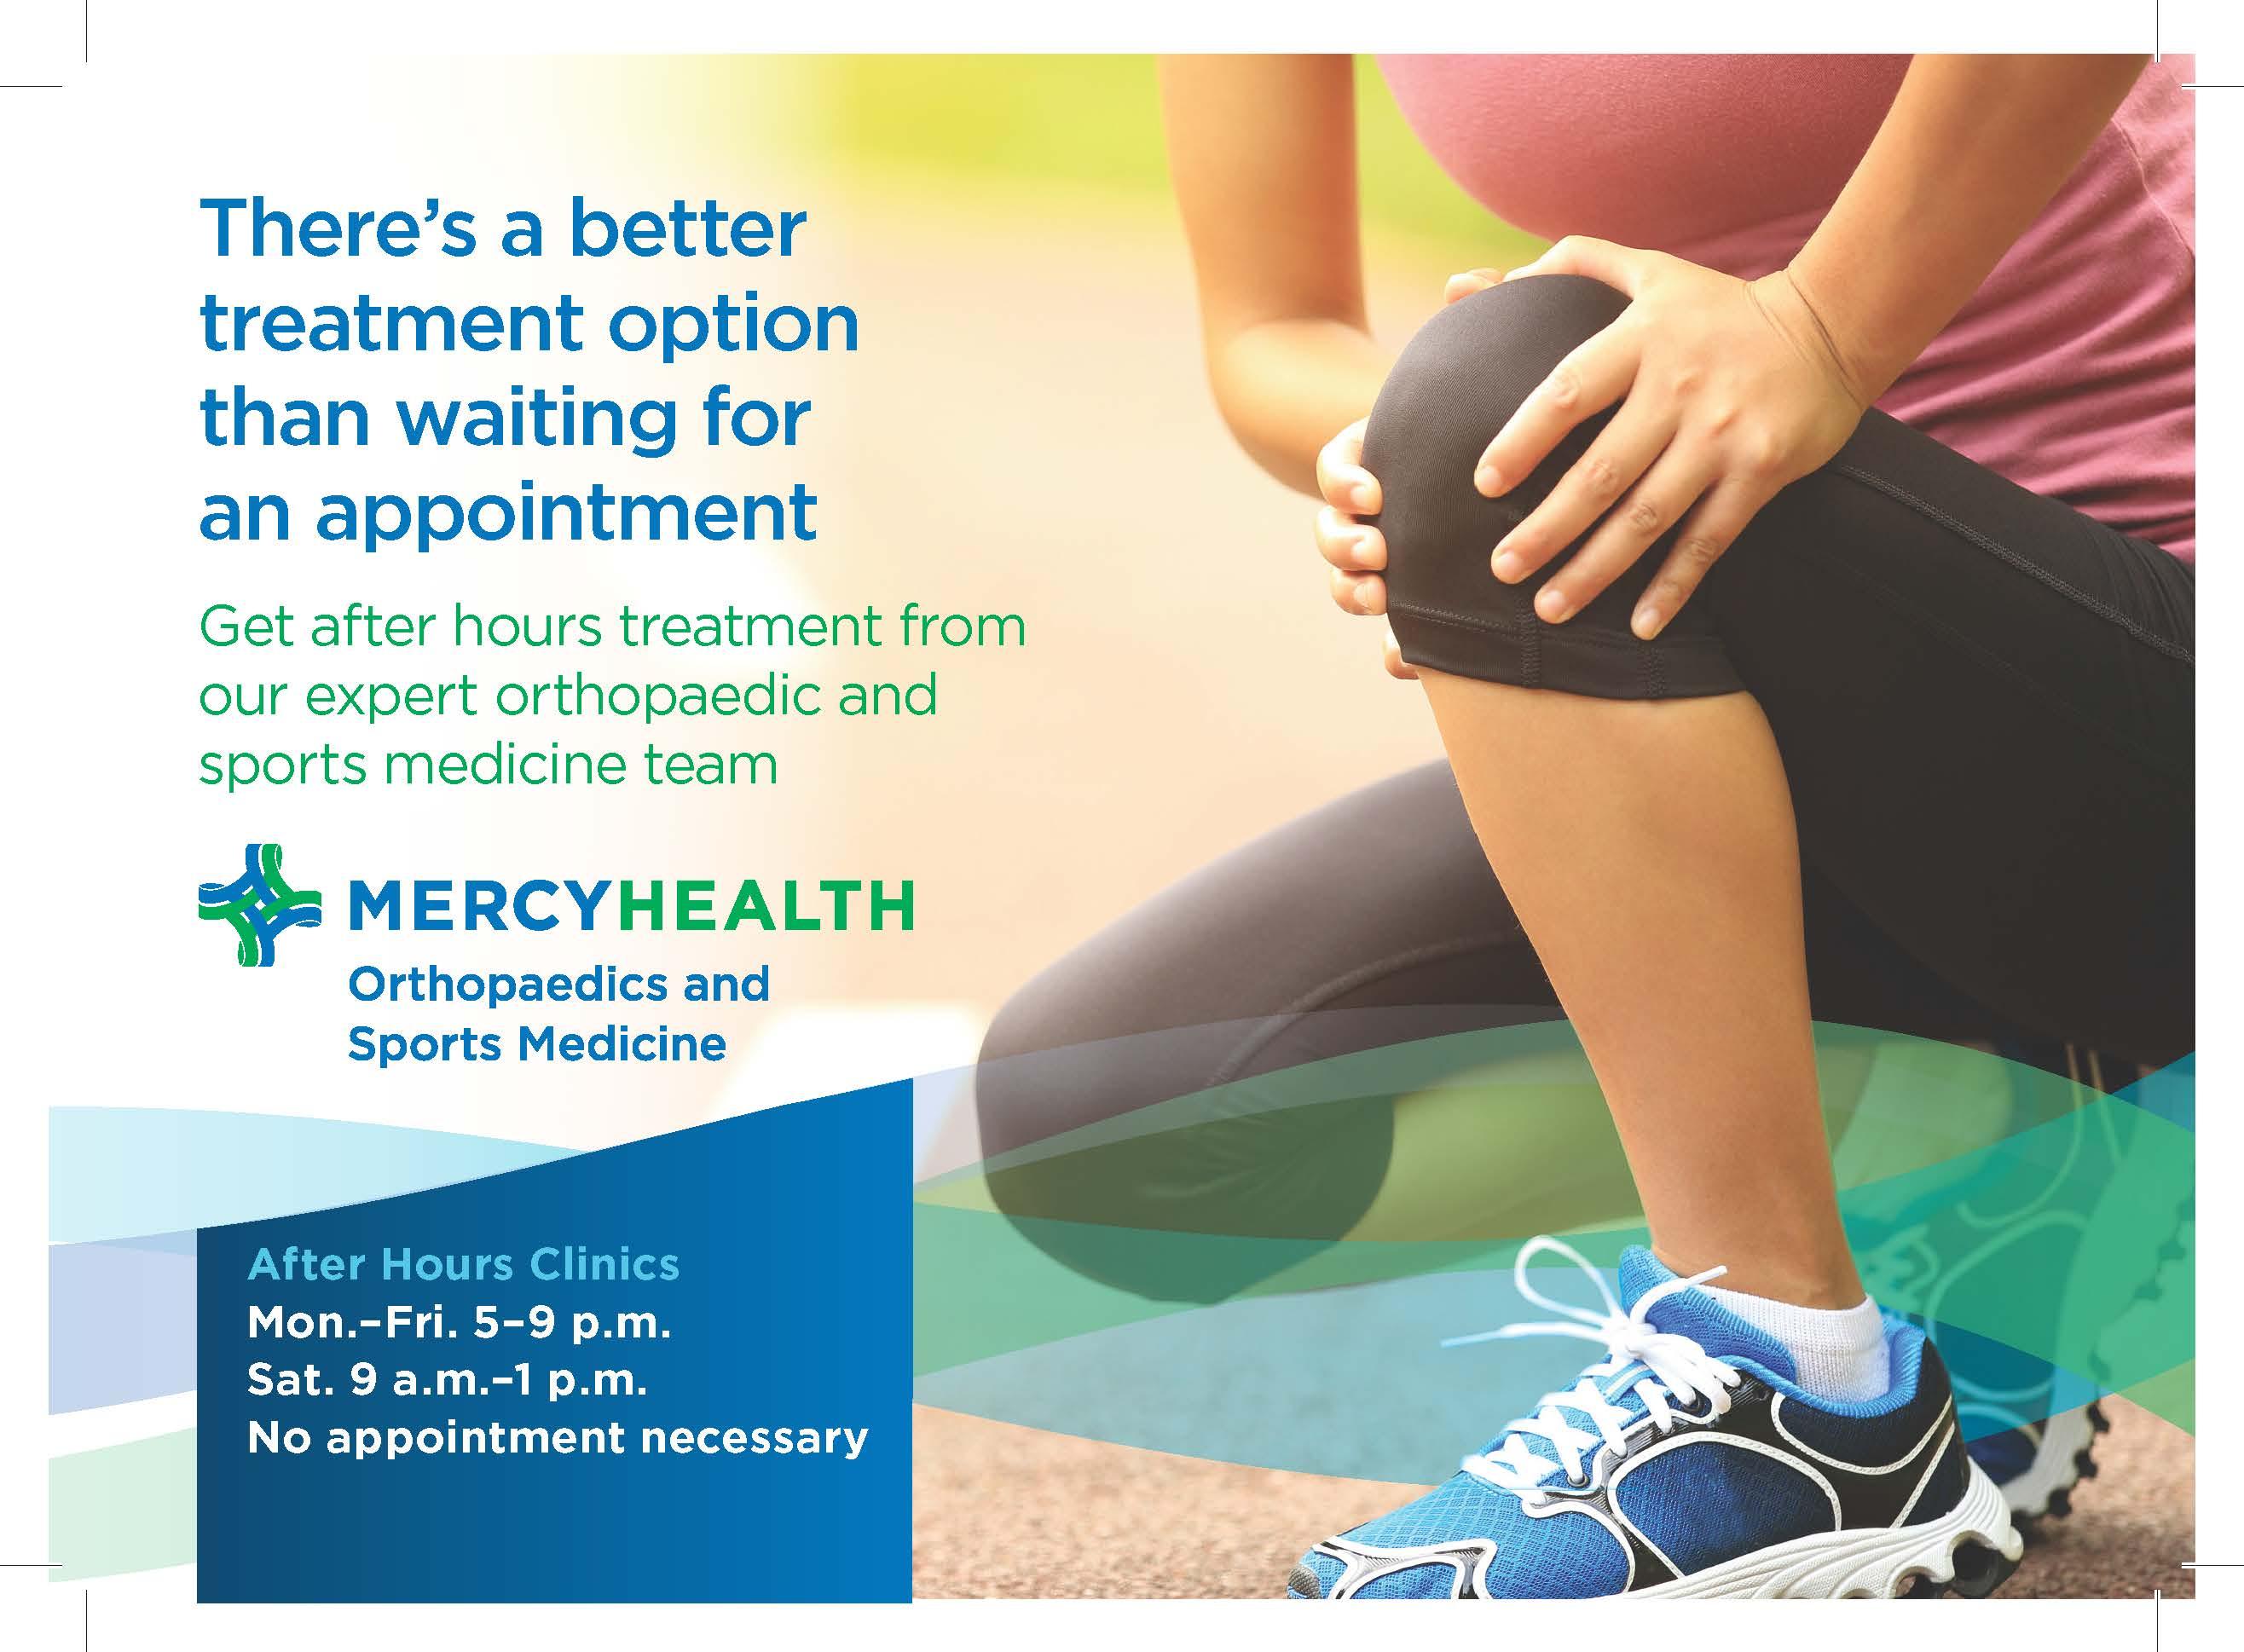 This is a flyer about the Mercy Health new orthopaedic and sports medicine after-hours clinic.